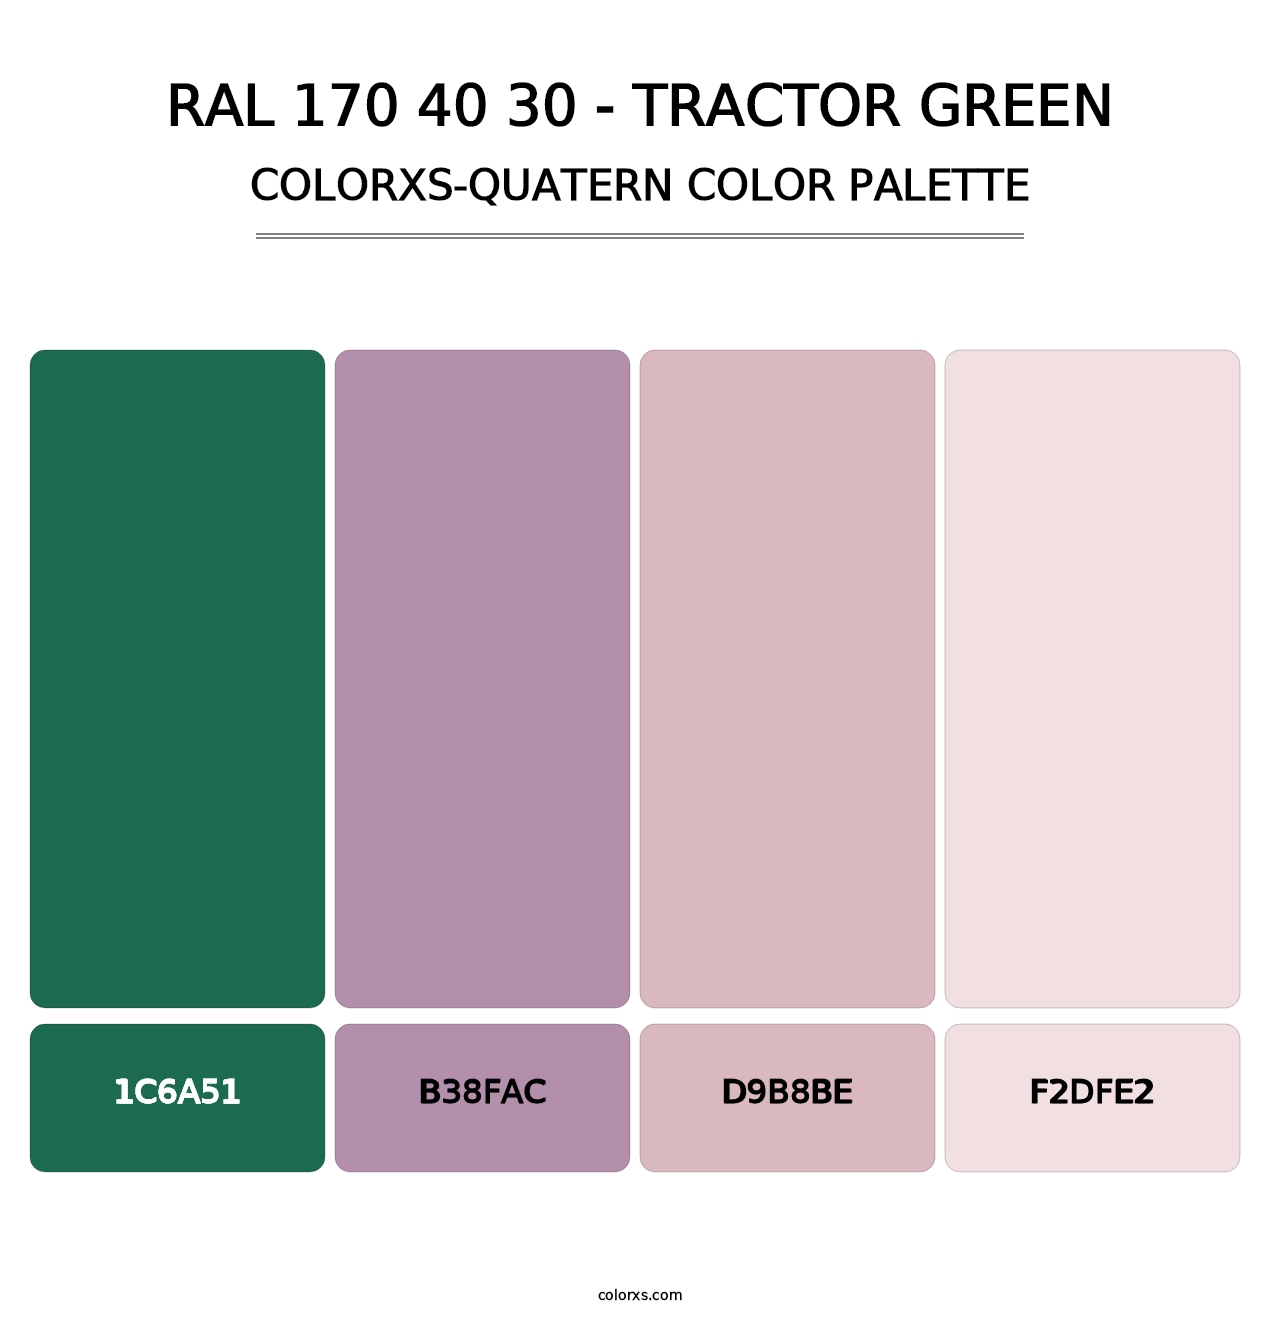 RAL 170 40 30 - Tractor Green - Colorxs Quatern Palette